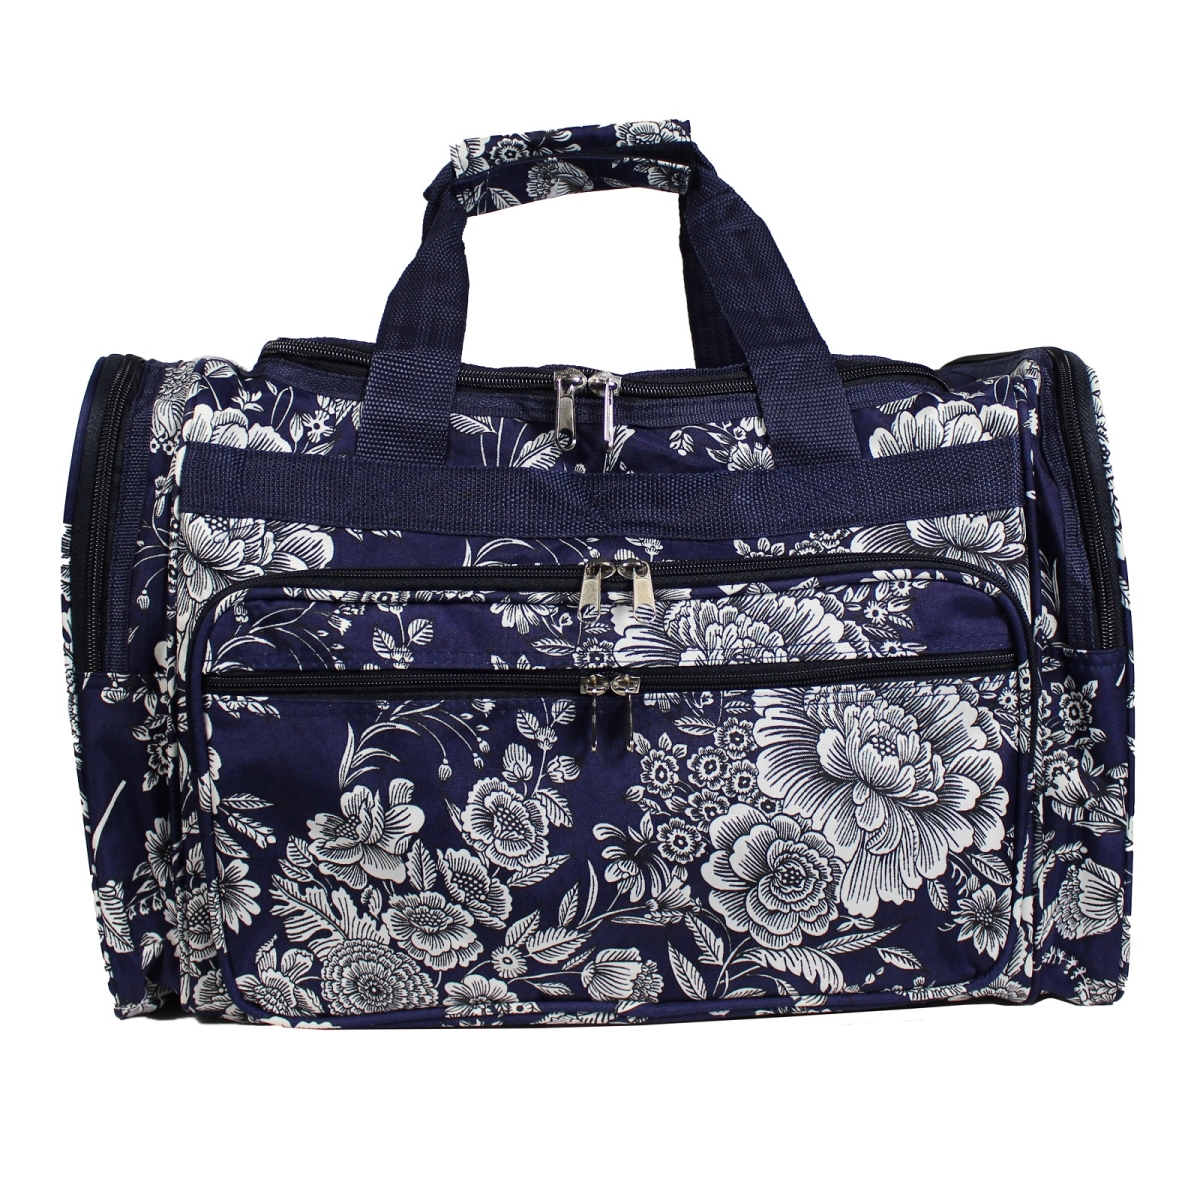 81t19-212 19 In. Carry-on Duffel Bag, Navy White Flowers